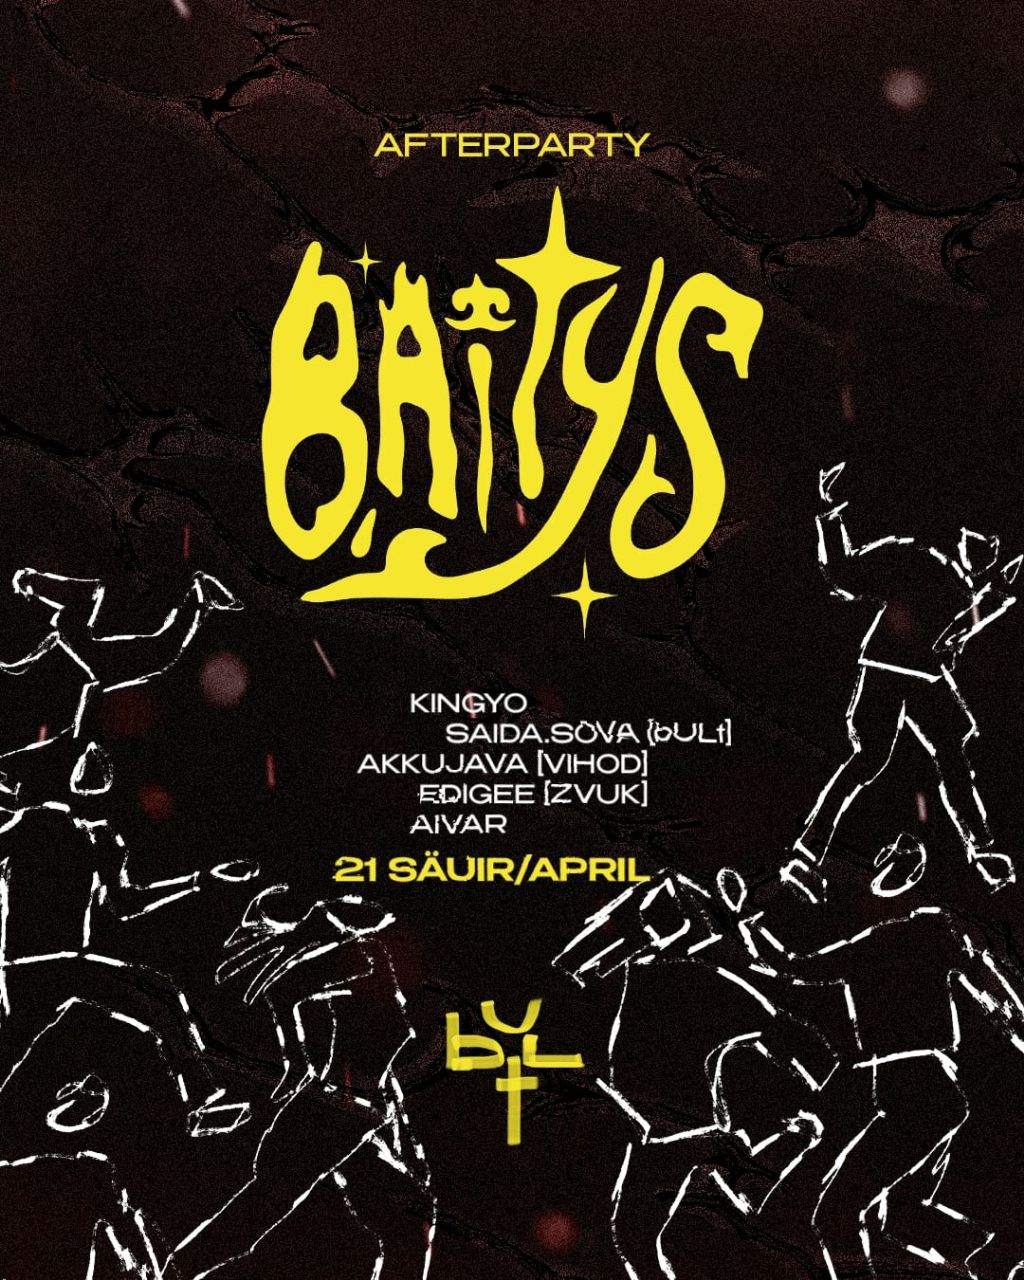 Afterparty B.AITYS - フライヤー表